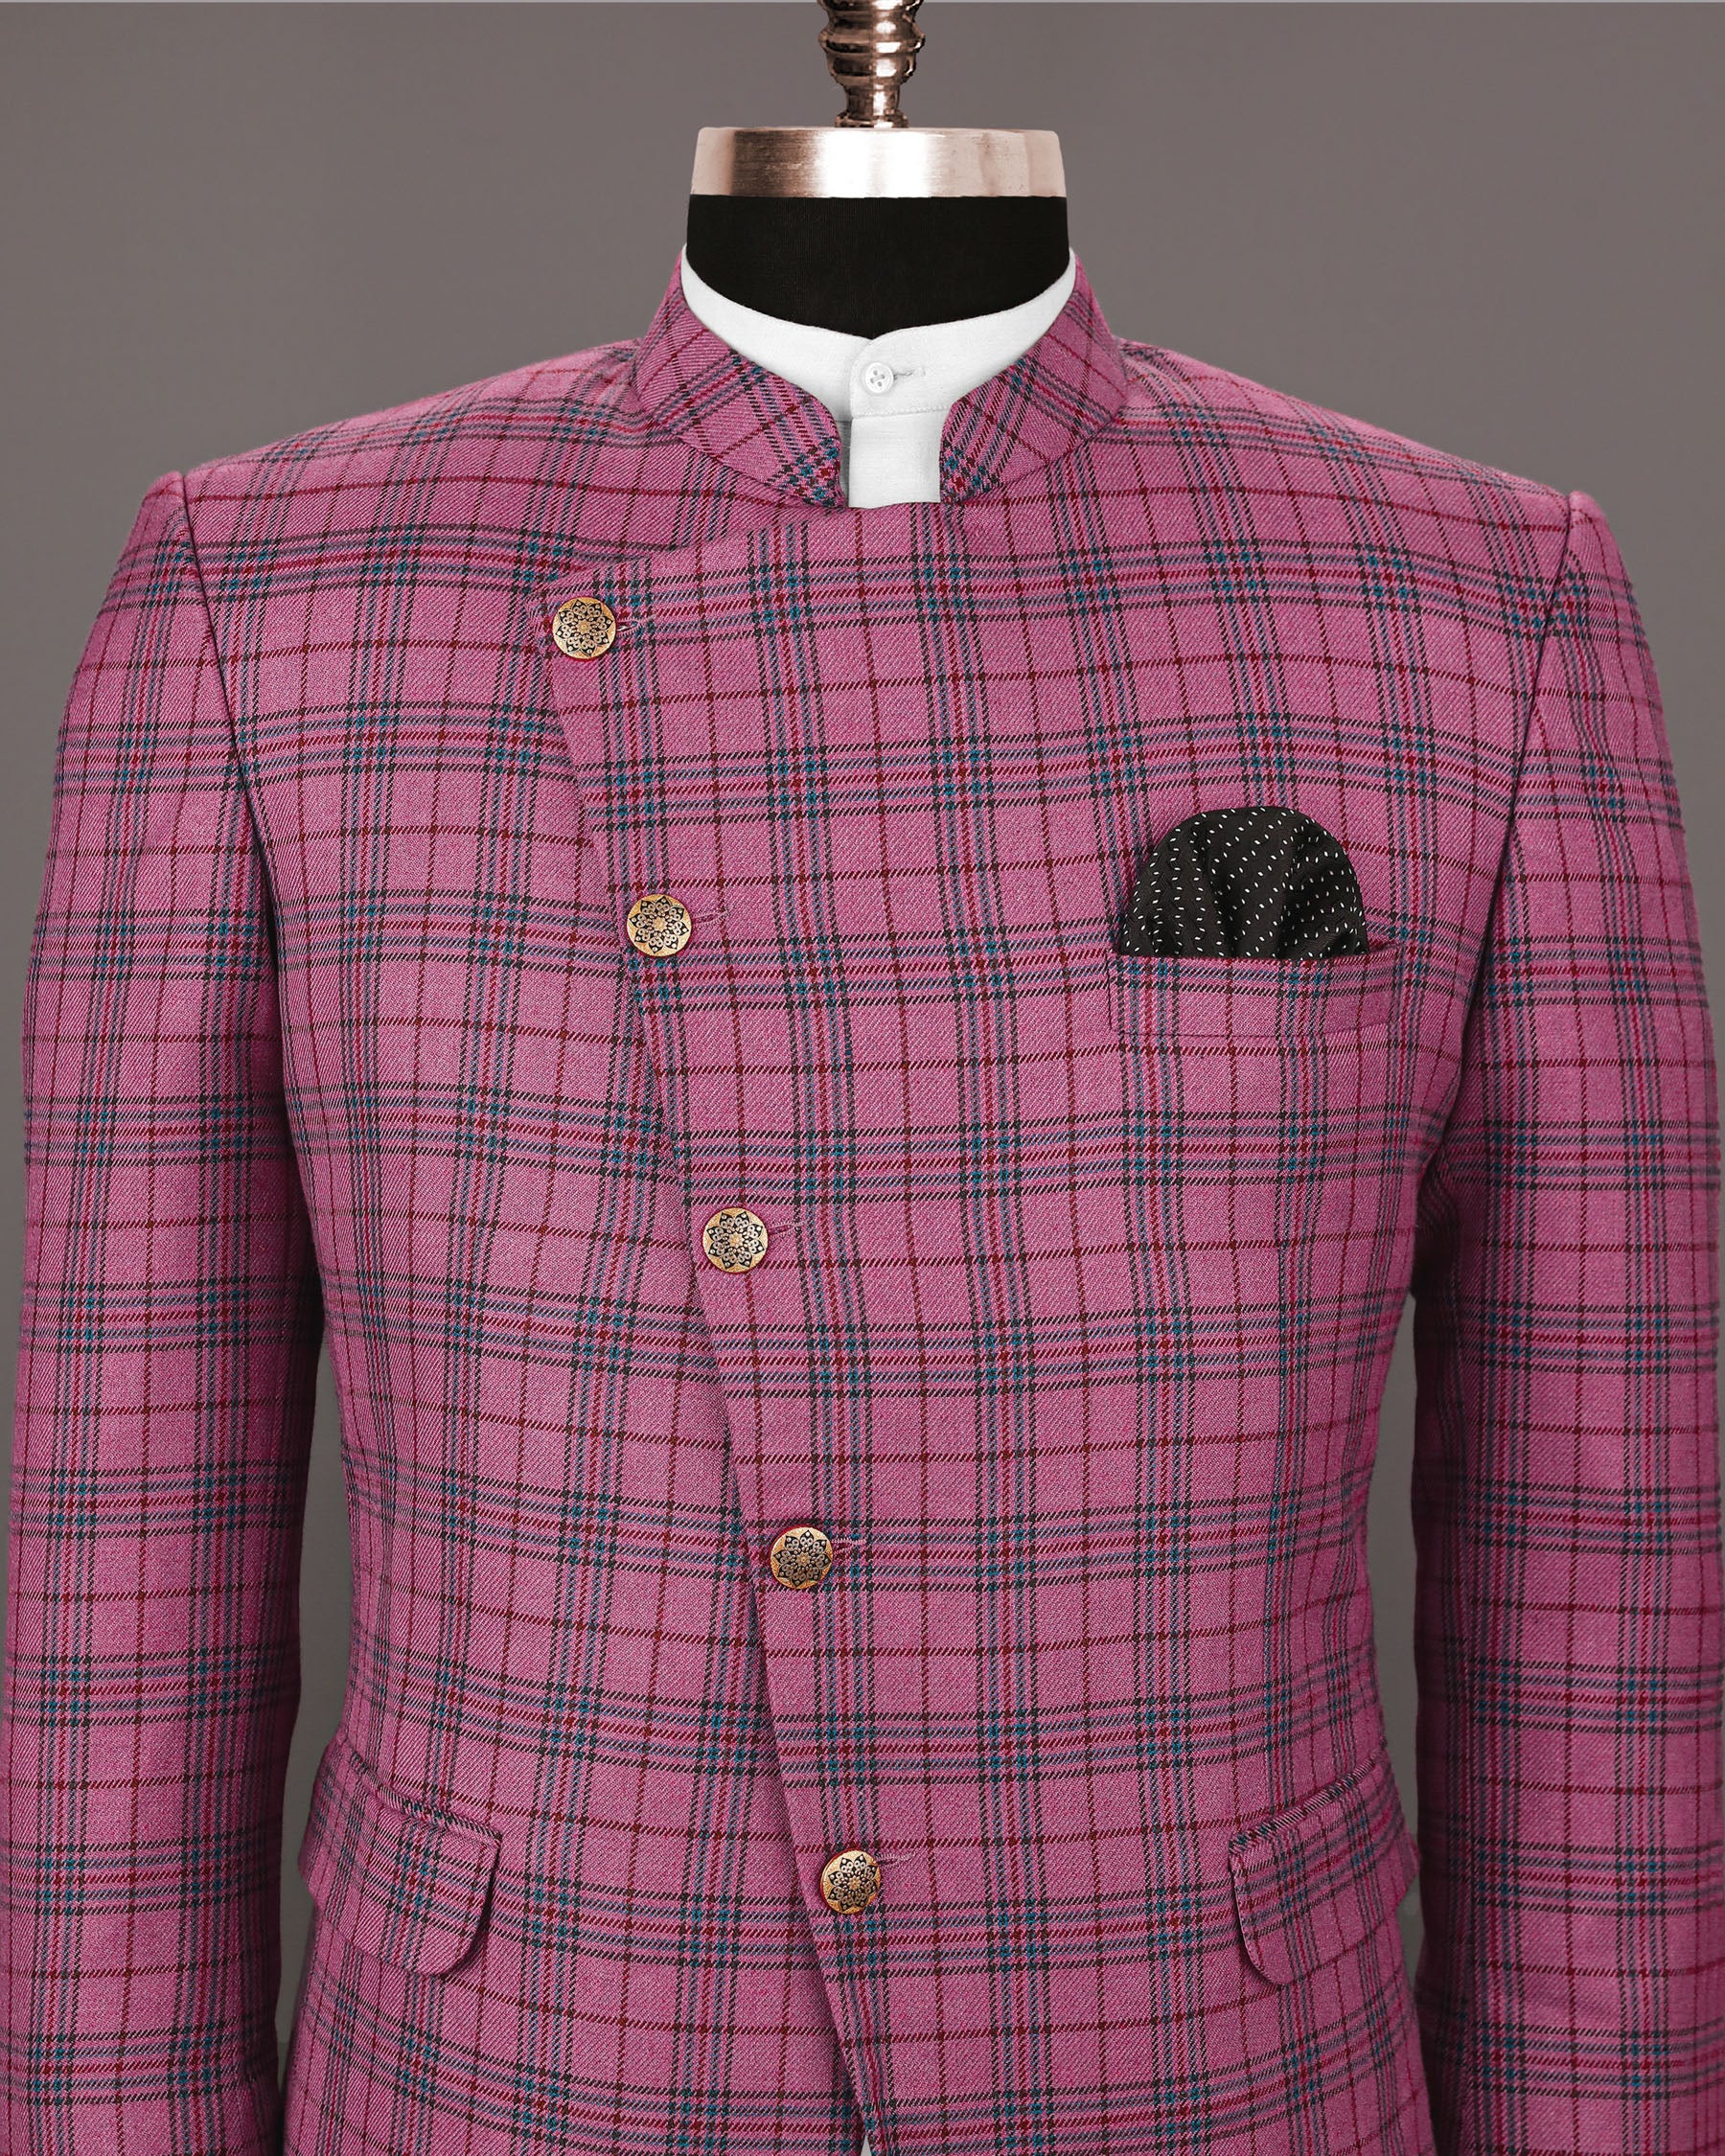 Tapestry Pink Checked Cross Buttoned Wool Rich Blazer BL1196-CBG-40, BL1196-CBG-44, BL1196-CBG-46, BL1196-CBG-50, BL1196-CBG-52, BL1196-CBG-54, BL1196-CBG-56, BL1196-CBG-36, BL1196-CBG-38, BL1196-CBG-42, BL1196-CBG-48, BL1196-CBG-60, BL1196-CBG-58